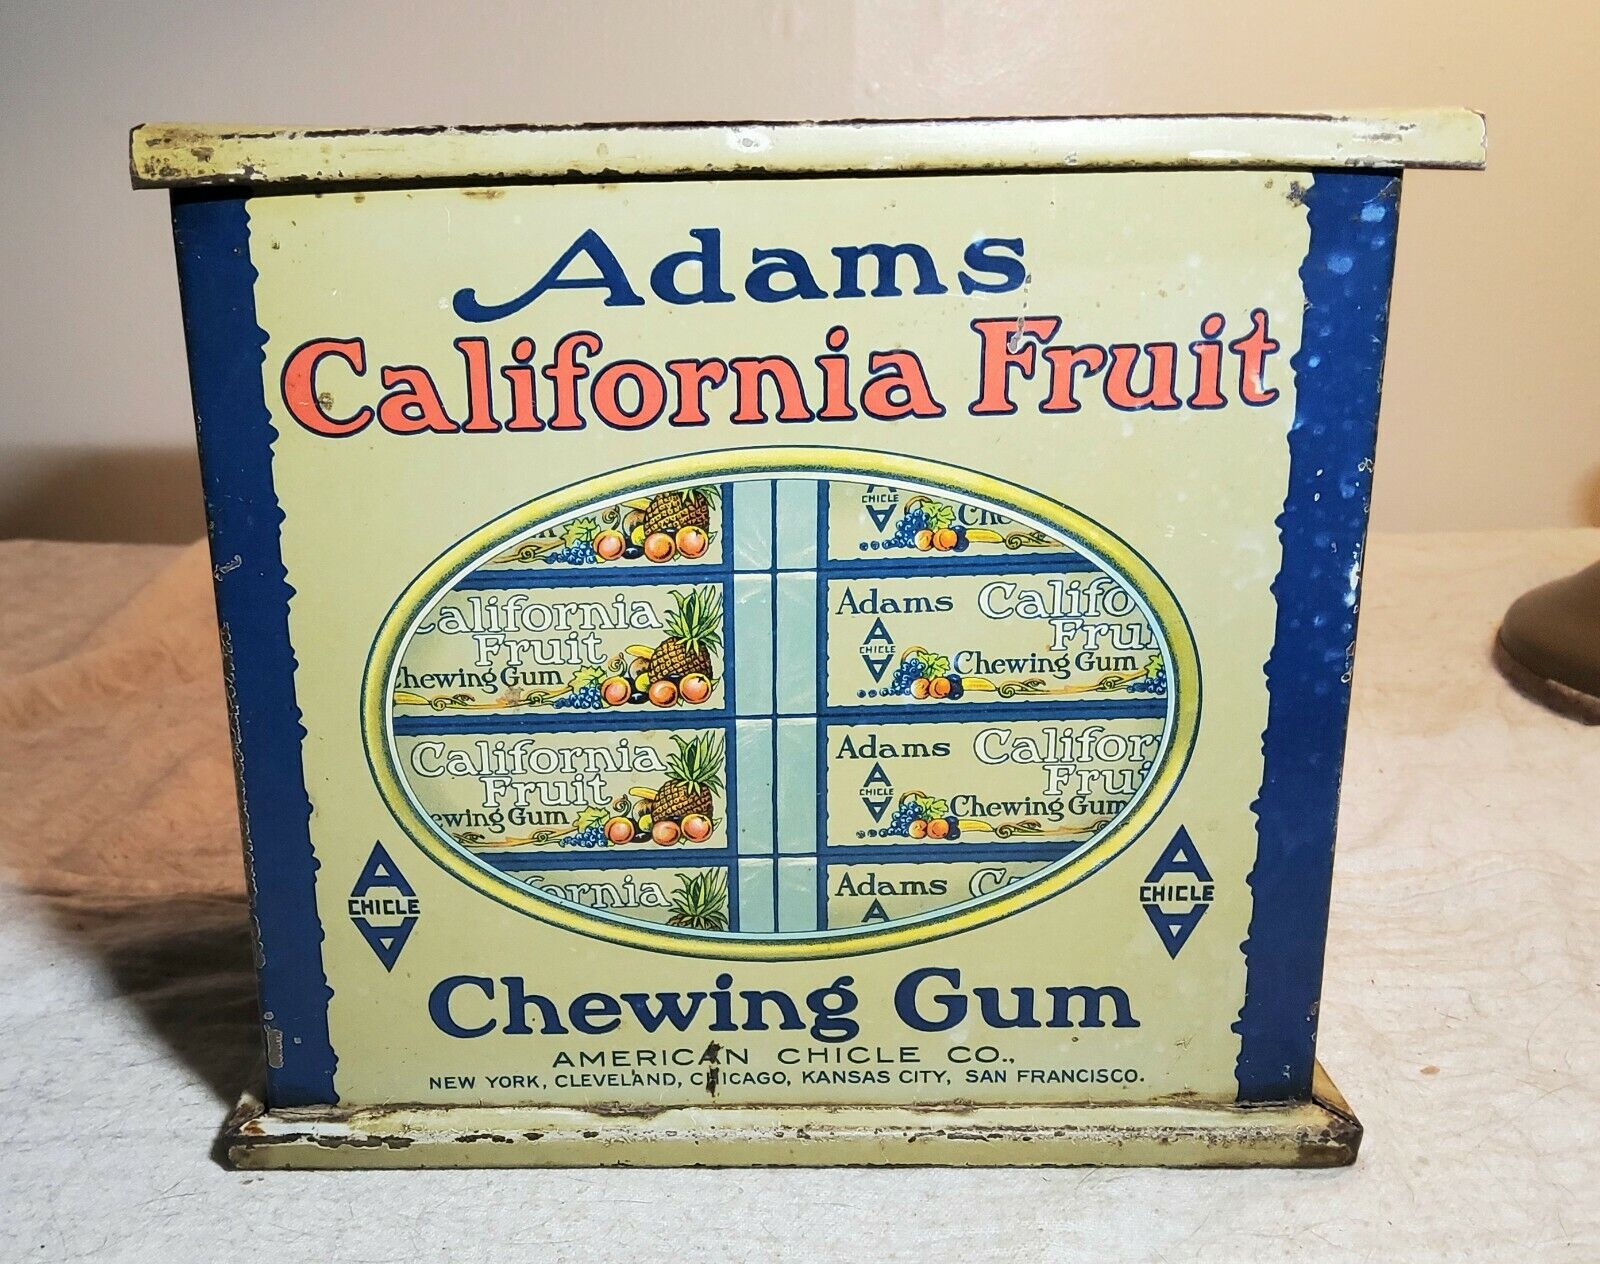 ANTIQUE ADAMS CALIFORNIA FRUIT CHEWING GUM STORE DISPLAY TIN AMERICAN CHICLE CO.